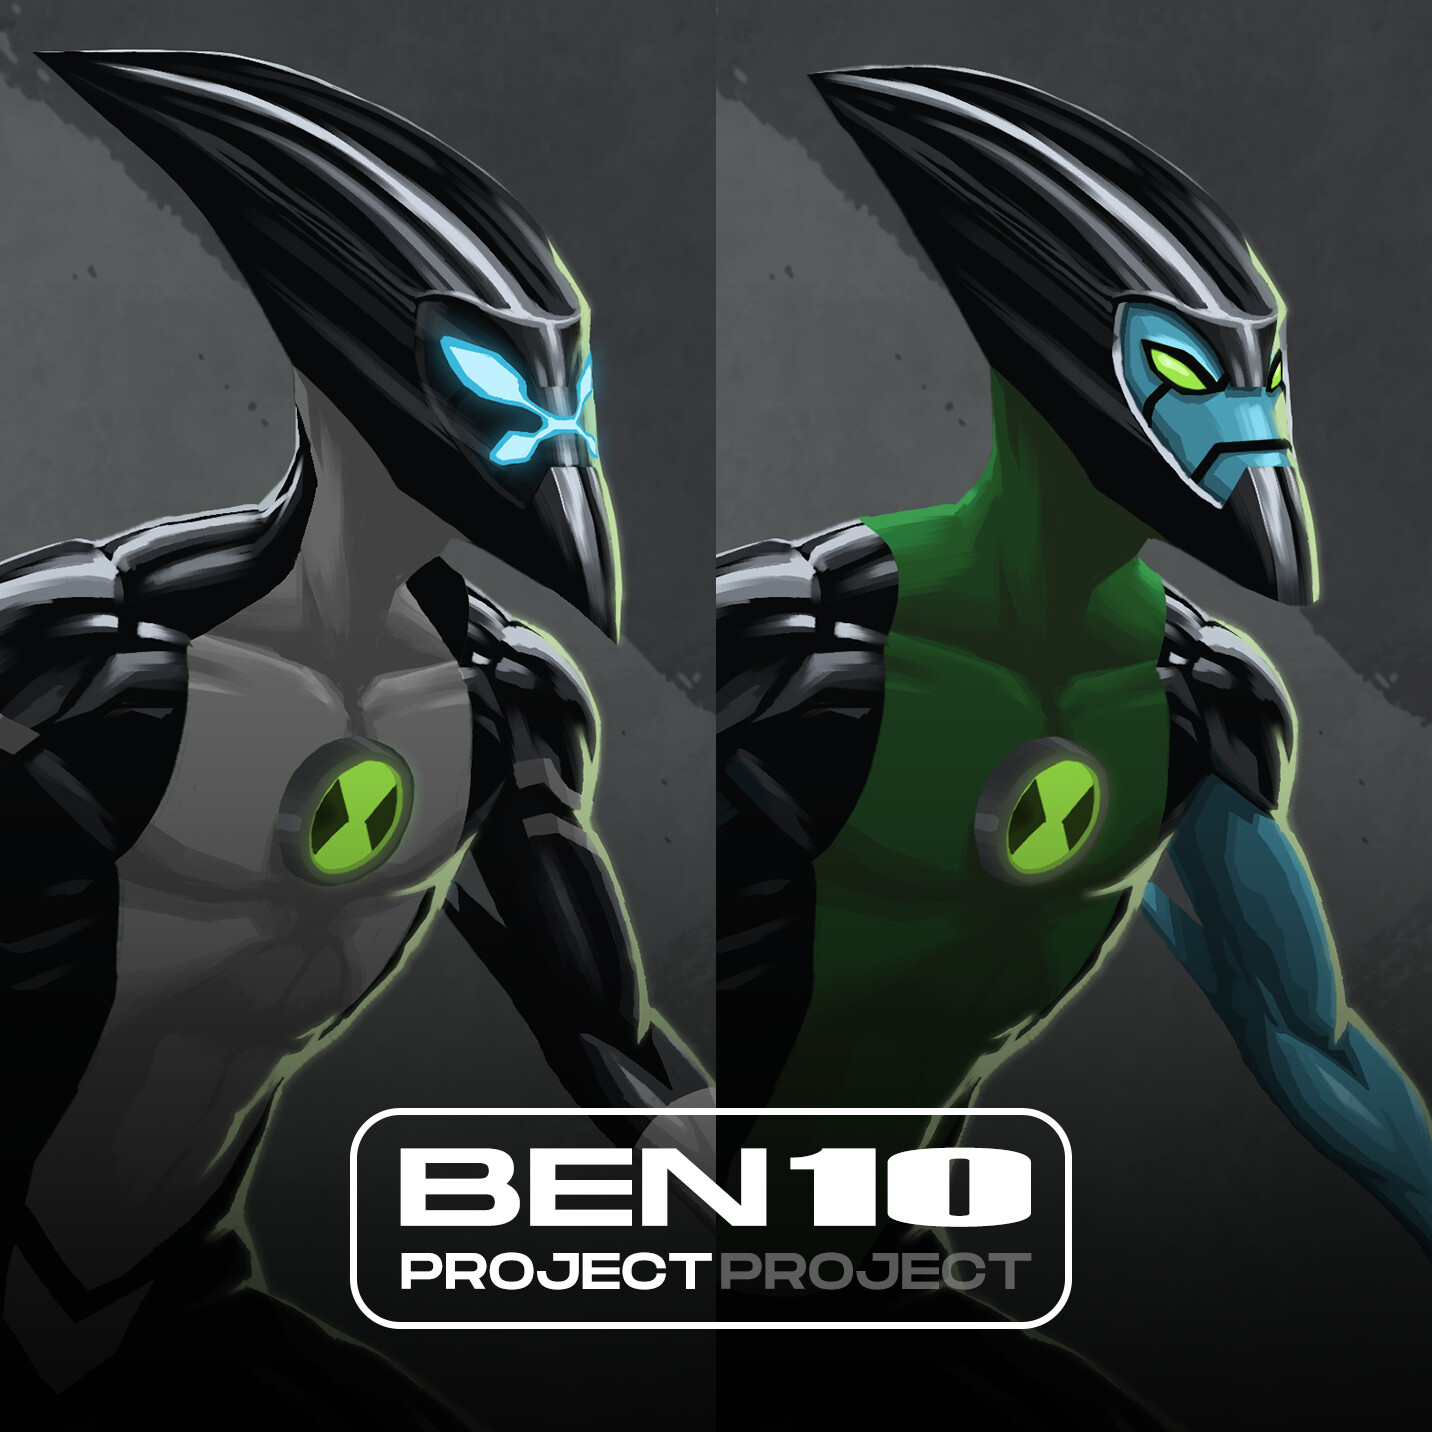 New Ben 10 Projects Are In Development